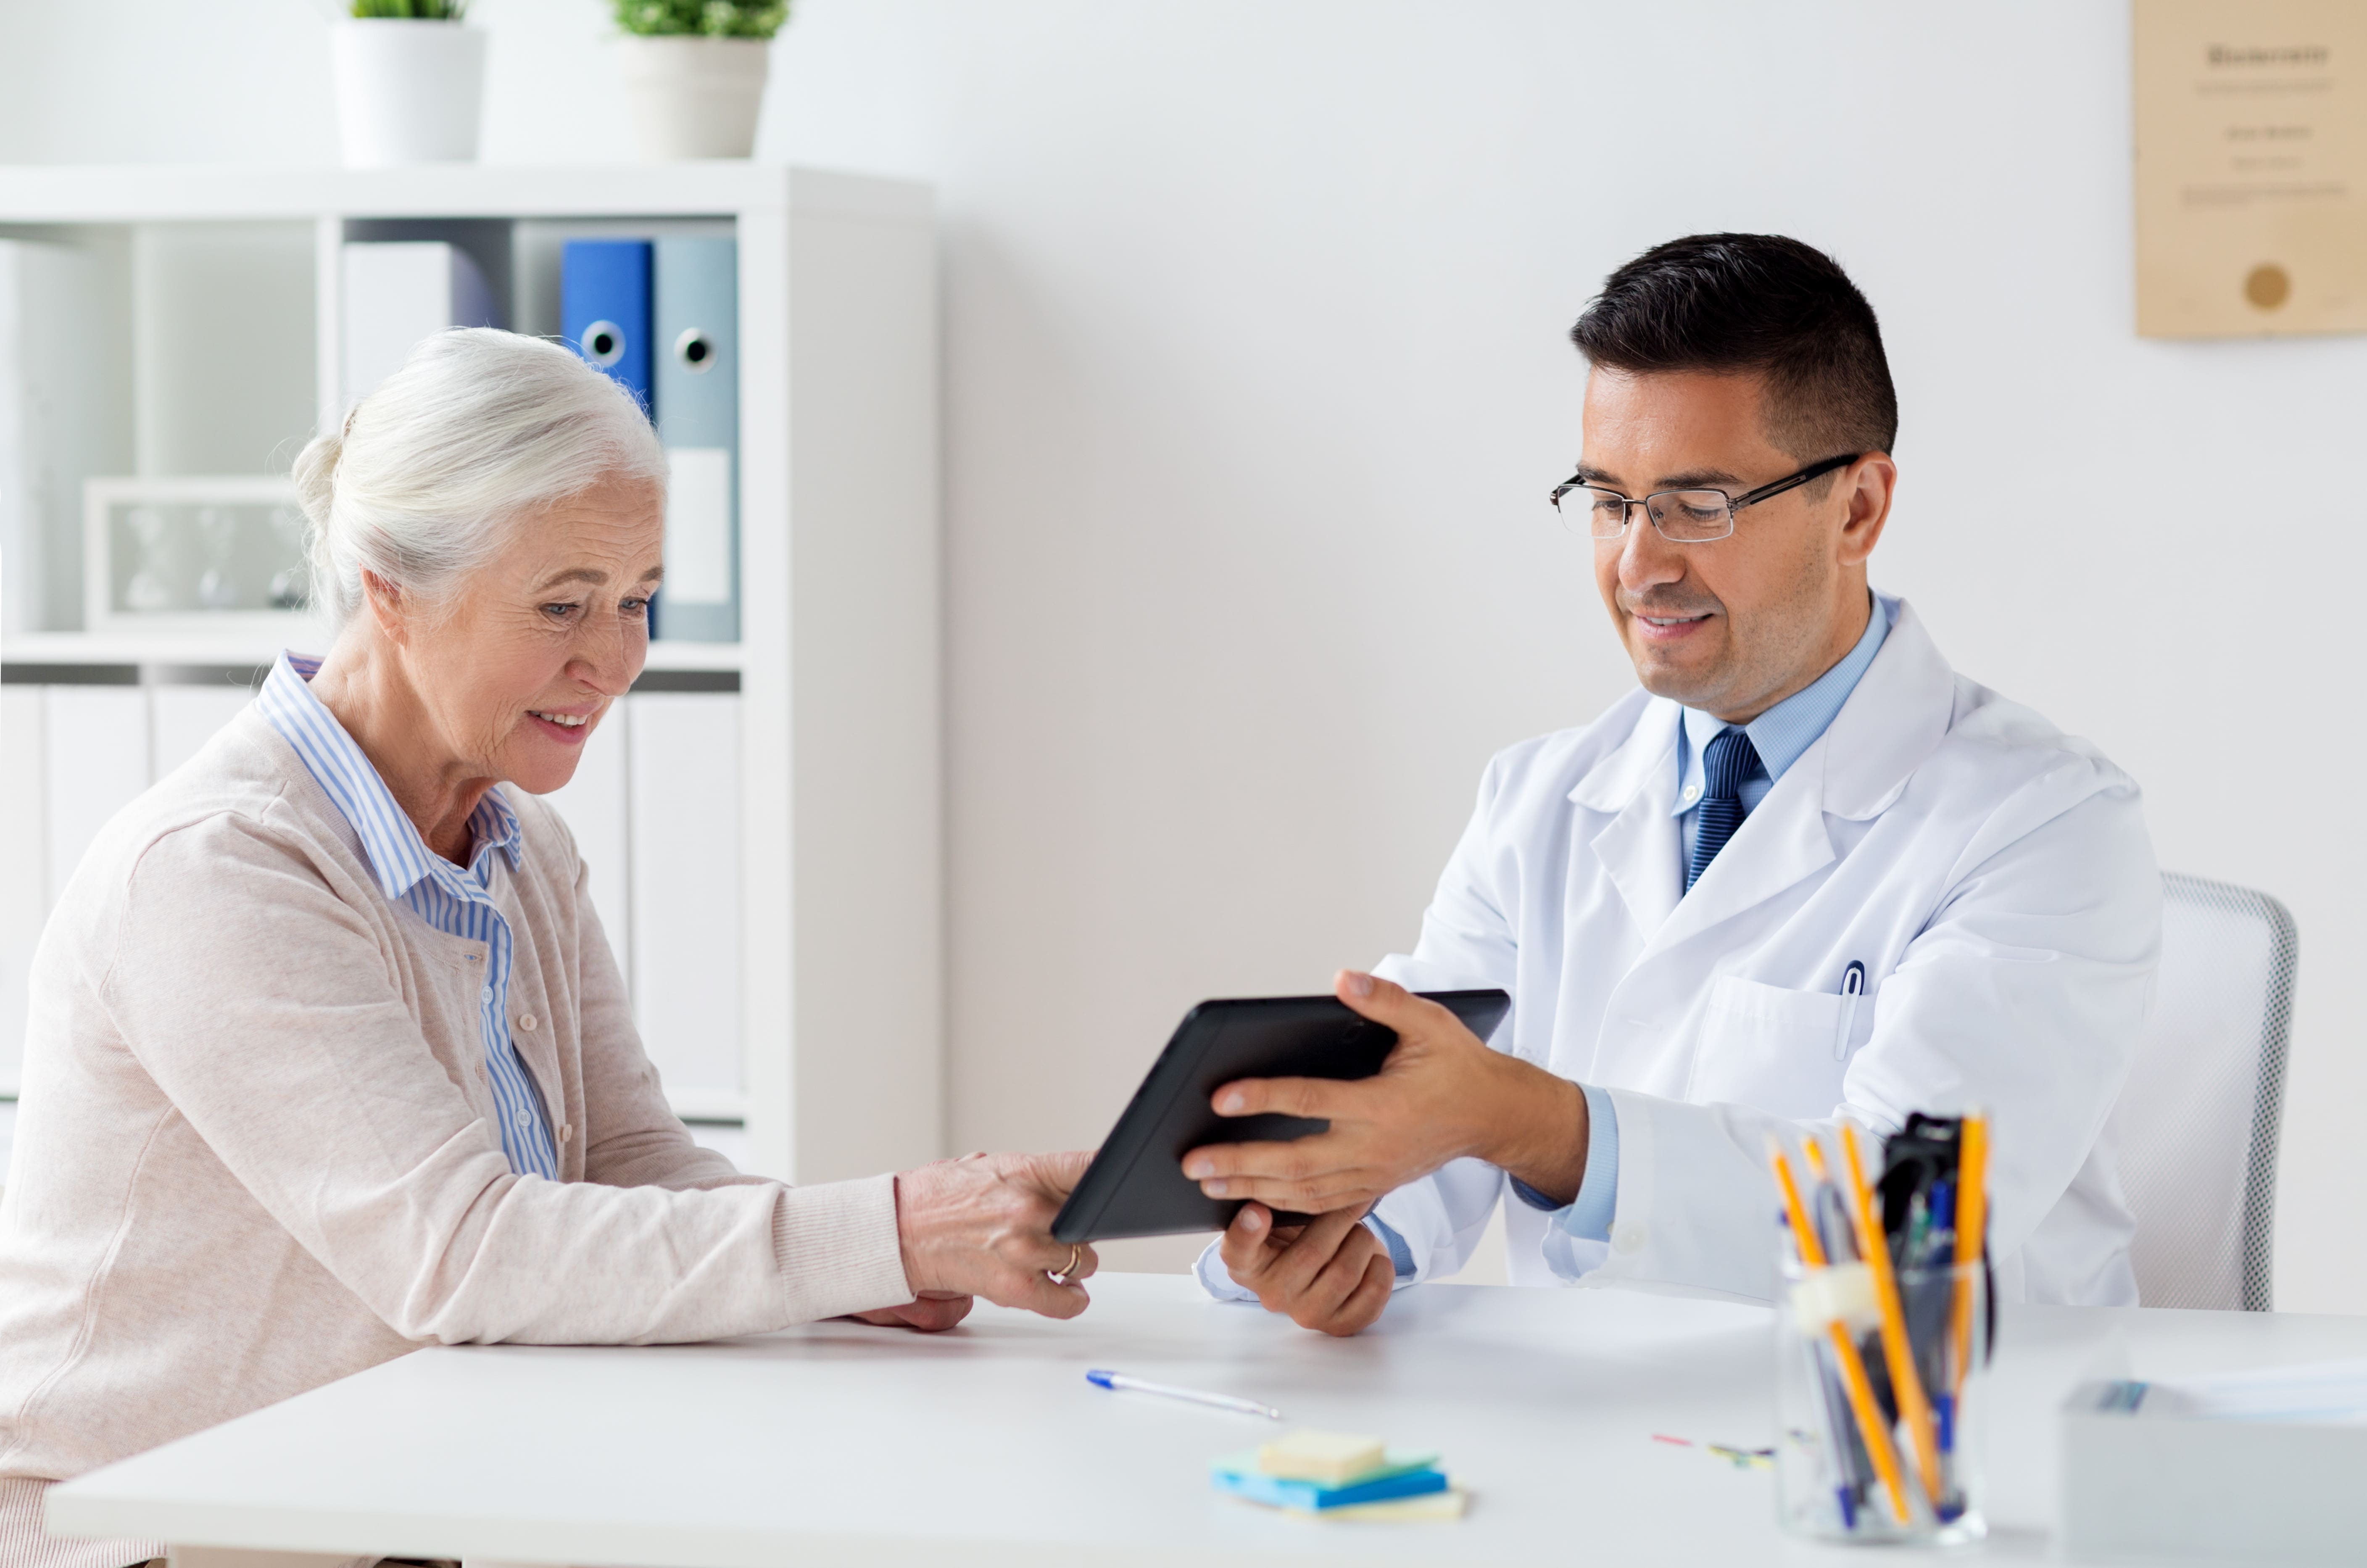 An elderly woman and doctor sit at a table and look at a tablet.